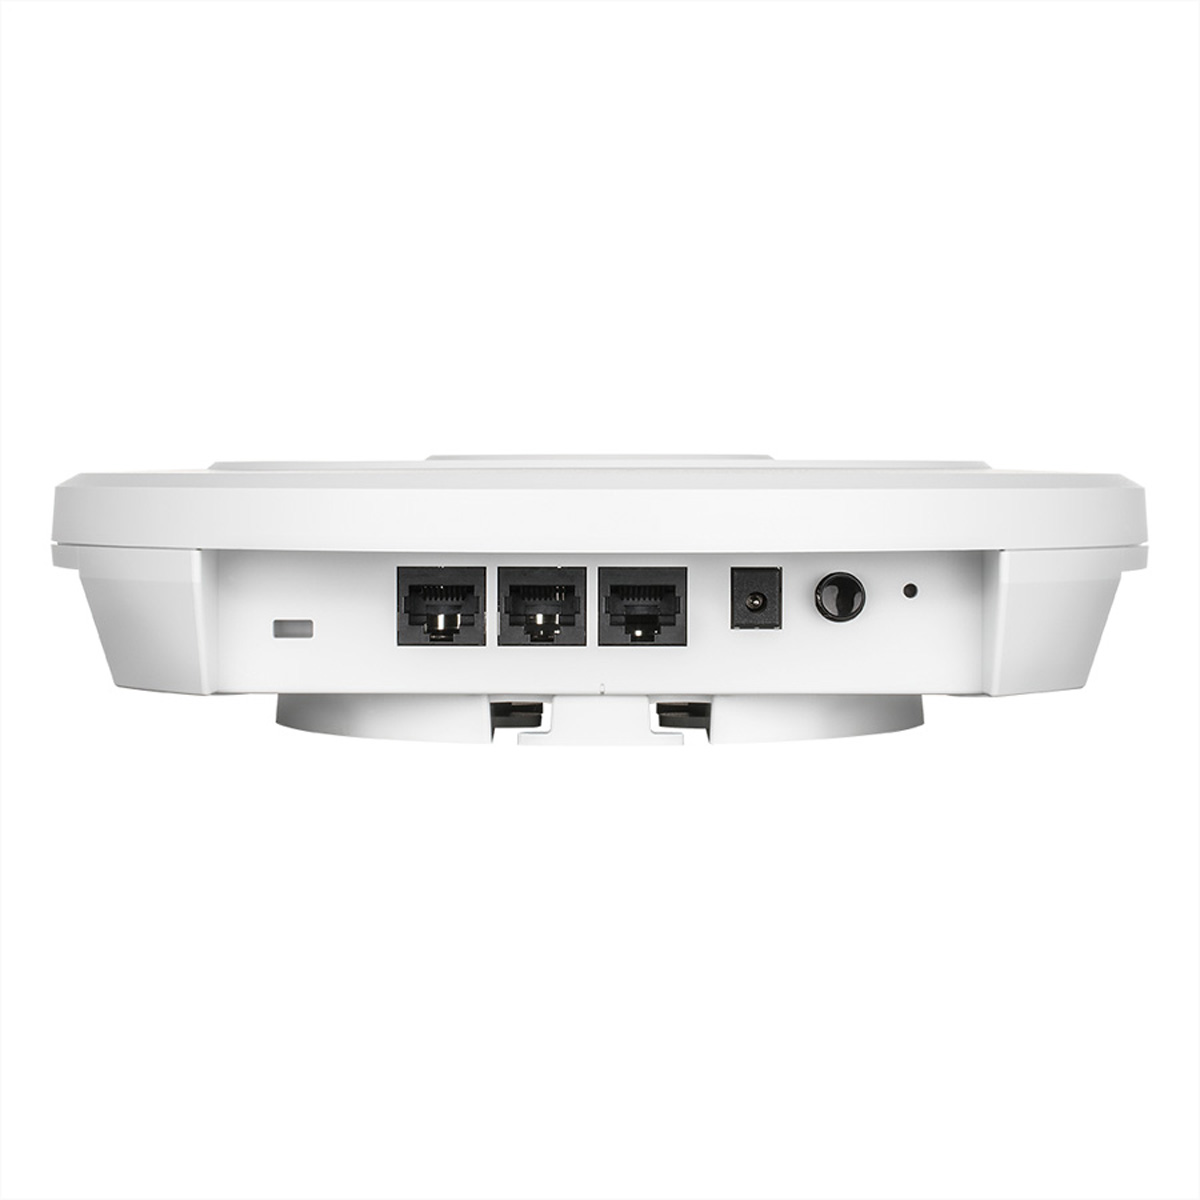 Wireless Tri-Band AC2200 Point DWL-7620AP Access Unified D-LINK Gbit/s LAN Wave2 2,2